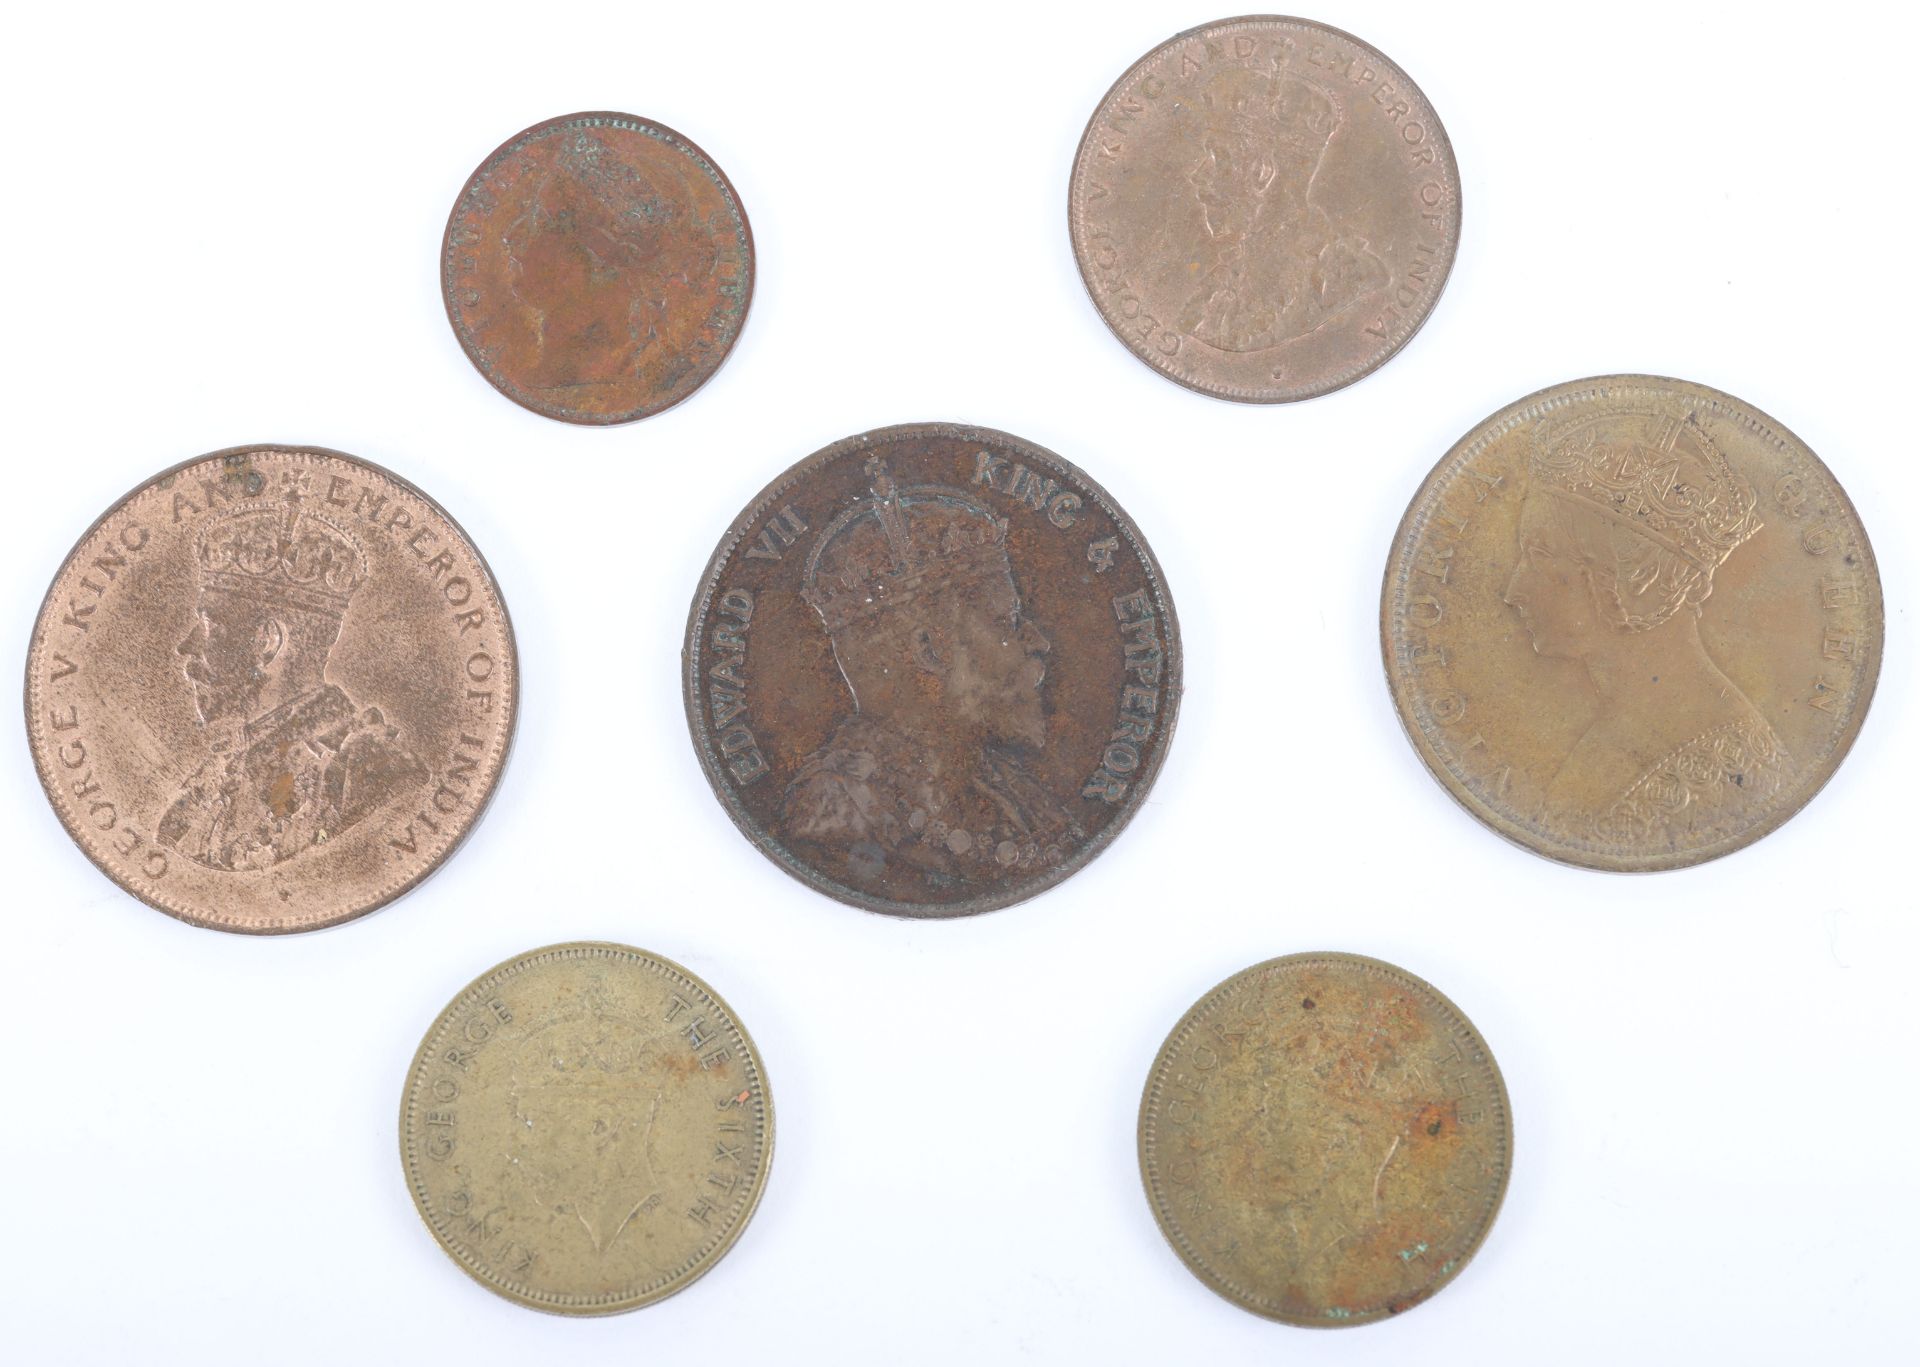 British Colonies, One Cent 1901, 1902, 1923 and 1933, Ten Cents 1949 and 1950, and 1884 Straits Sett